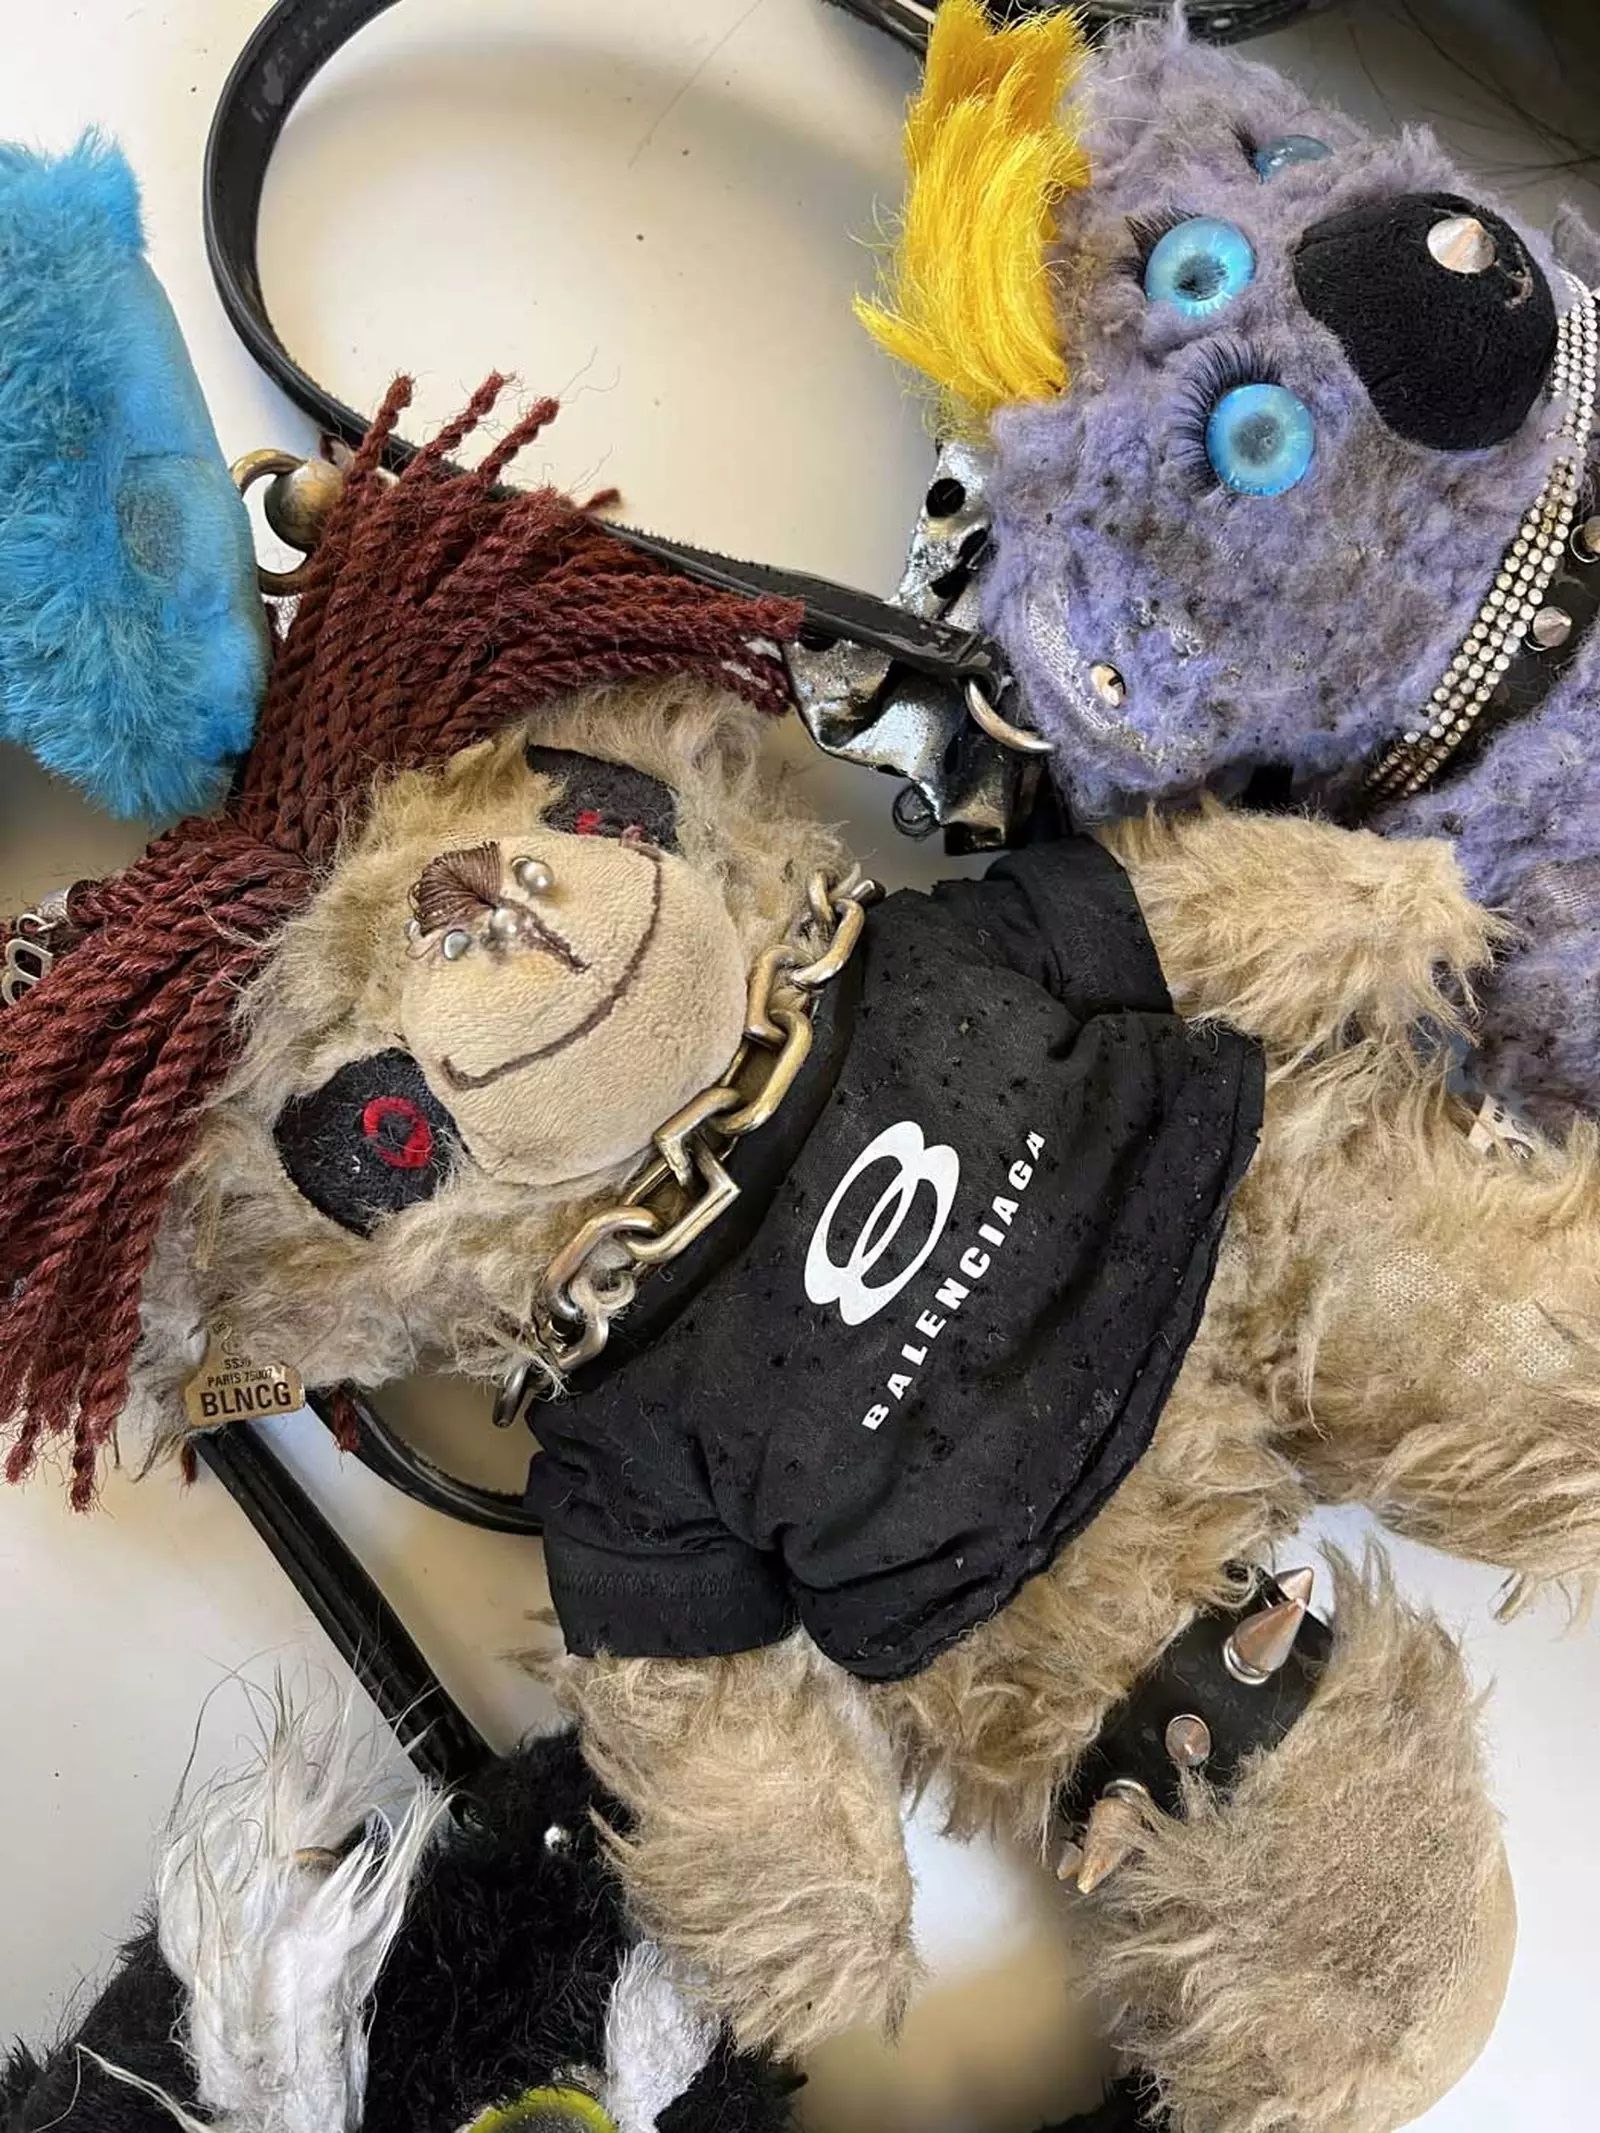 Balenciaga is dressing teddy bears up in bondage gear for kids to